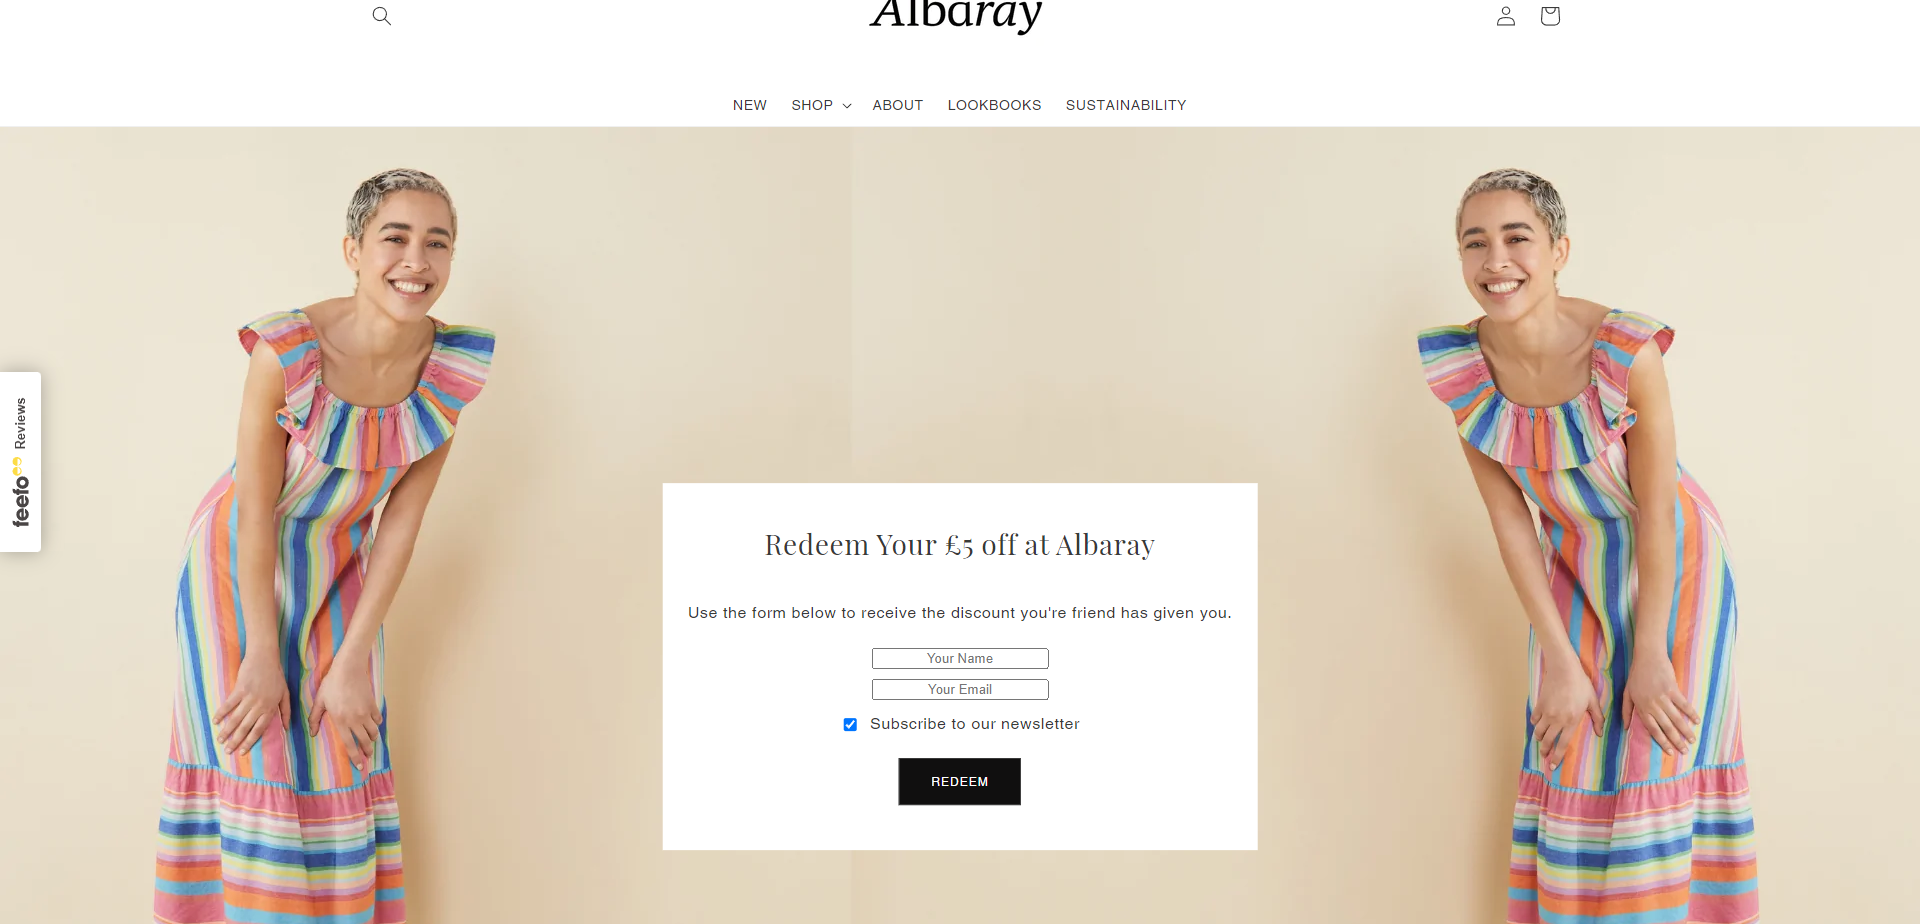 Landing Page for Albaray